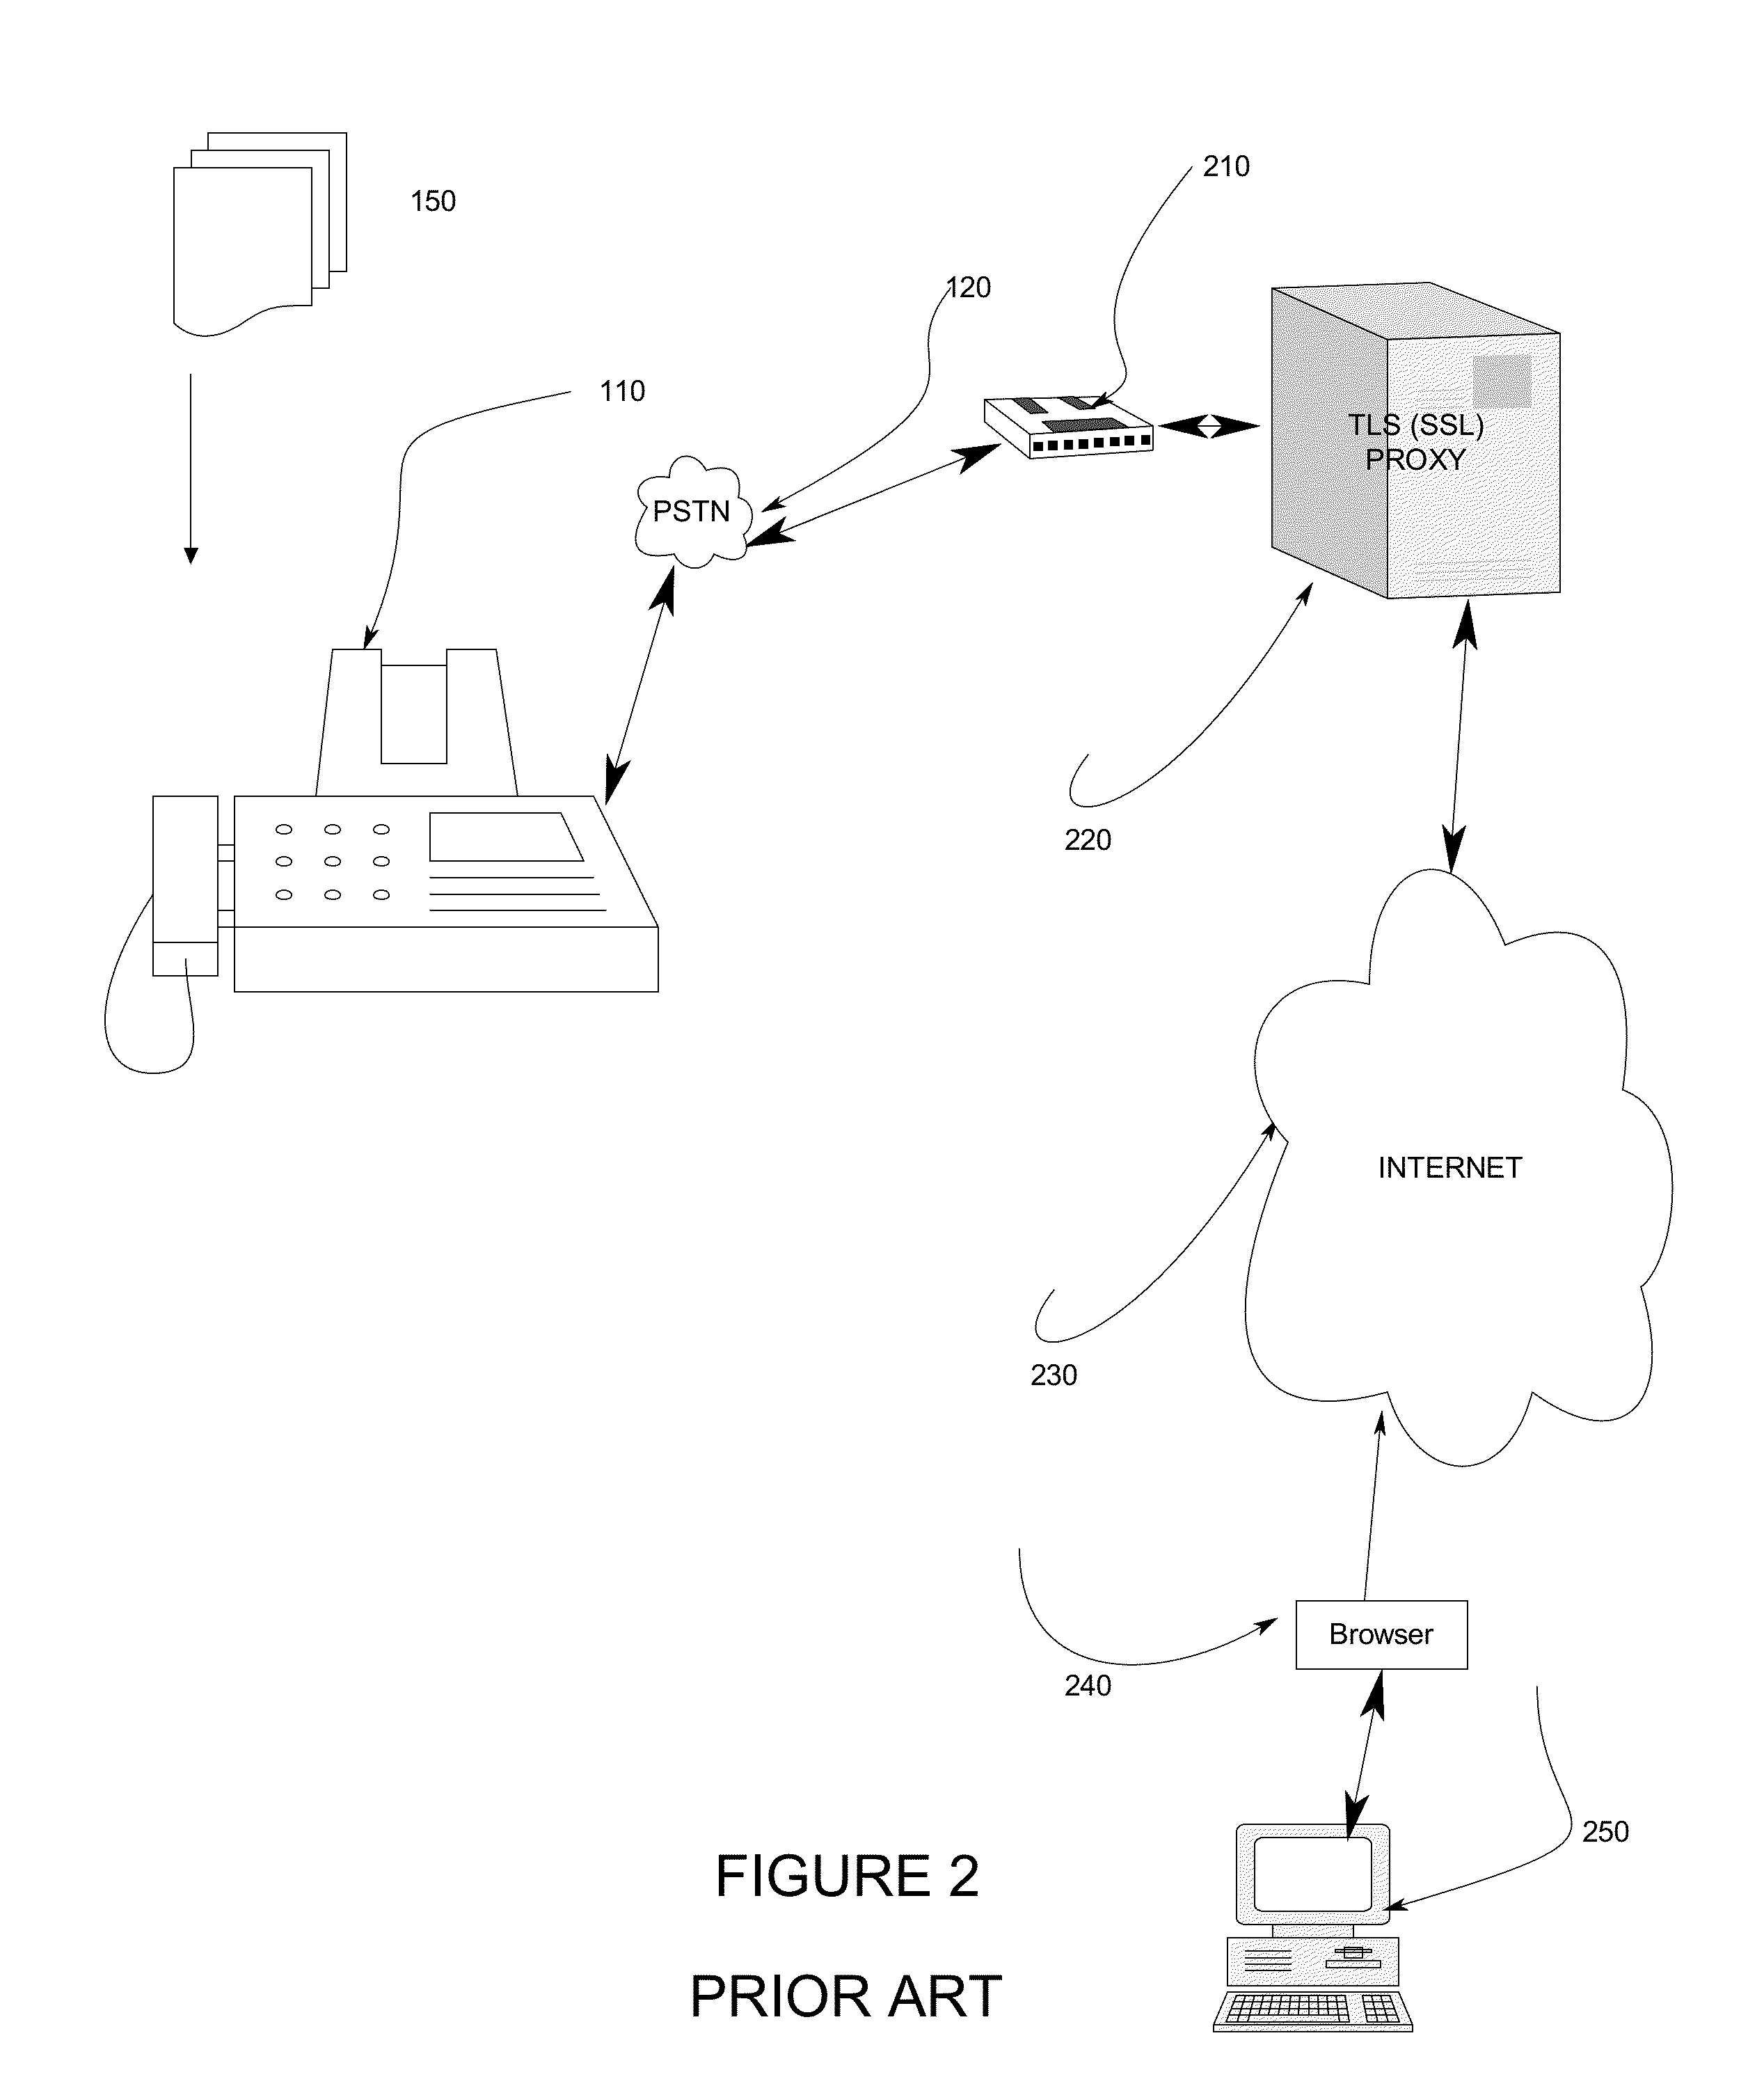 Systems and Methods for the Distribution of Electronic Messages